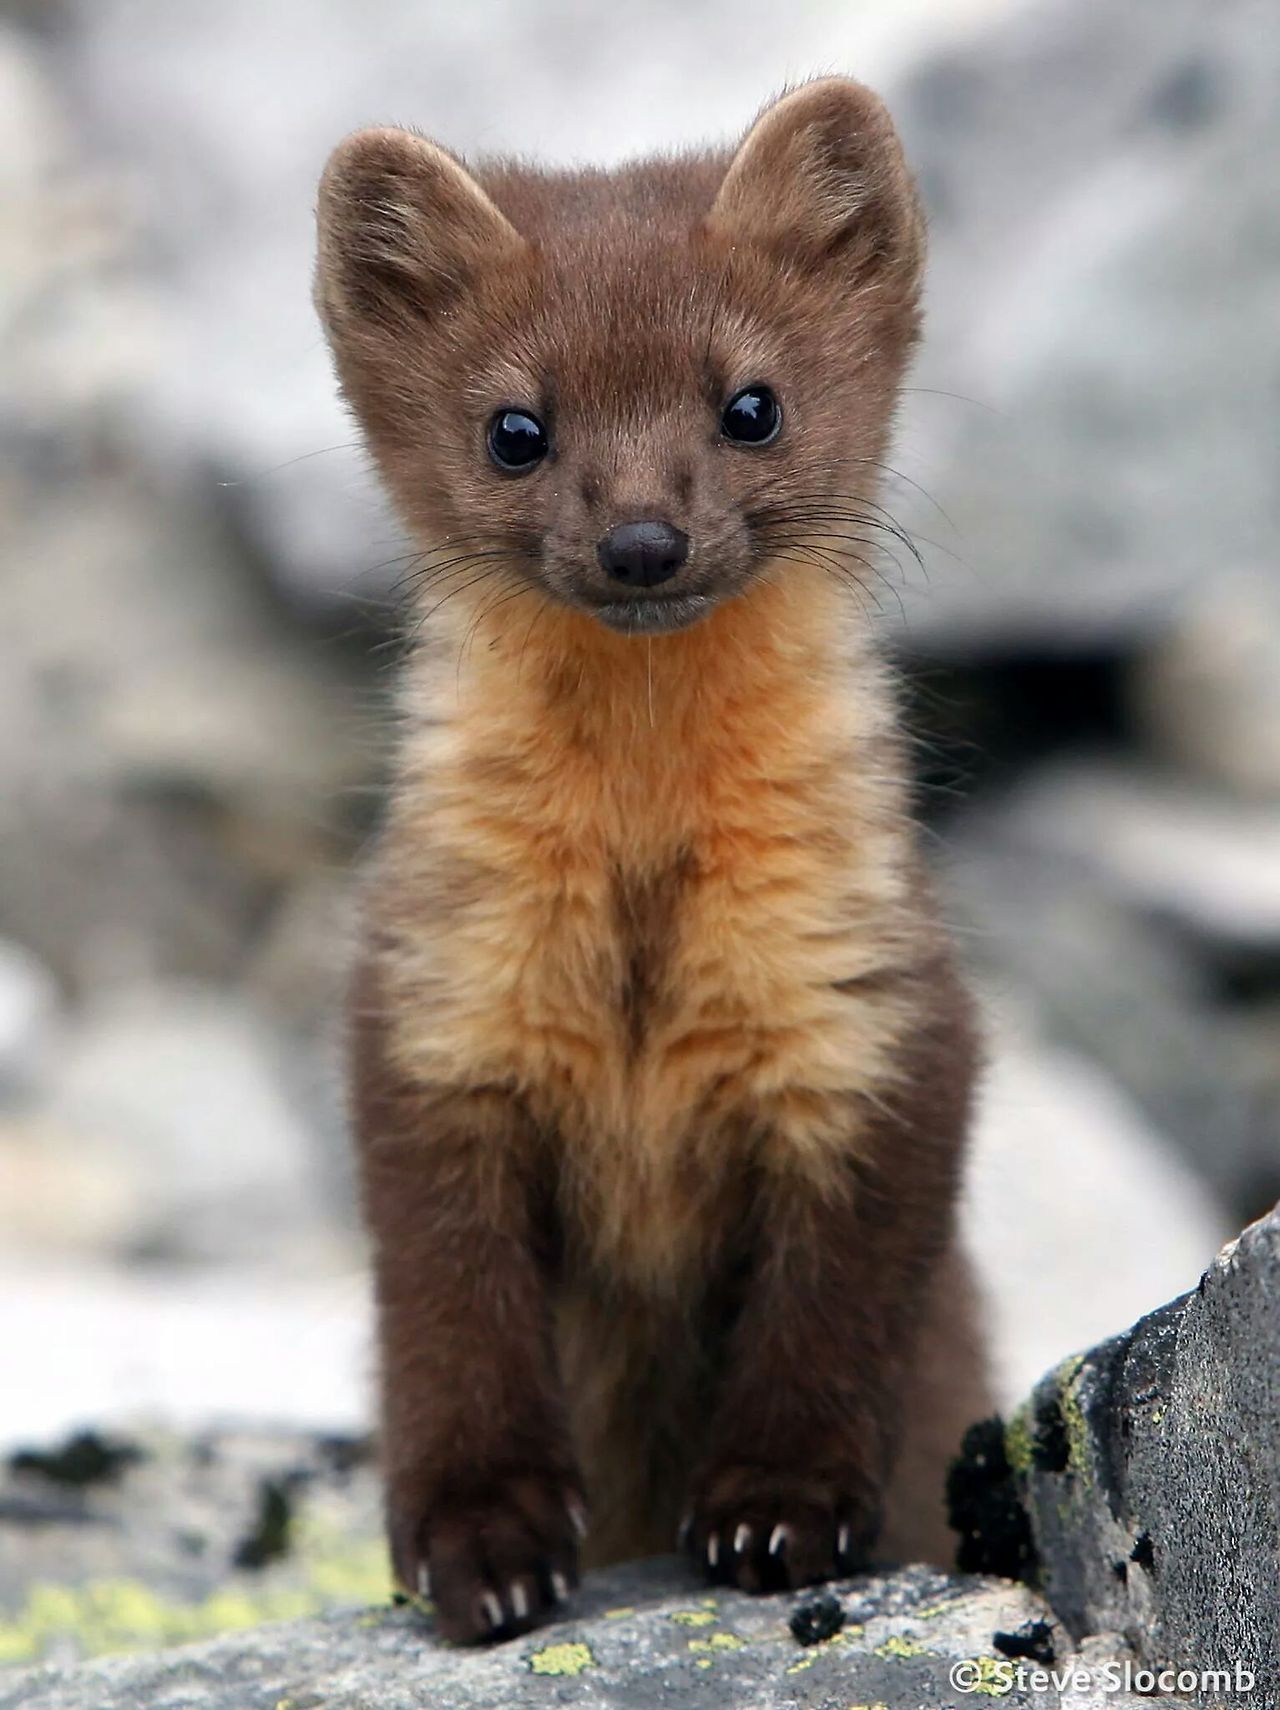 Today i found out Pine Martens exist. (Source: http://ift.tt/2oSaHXh)